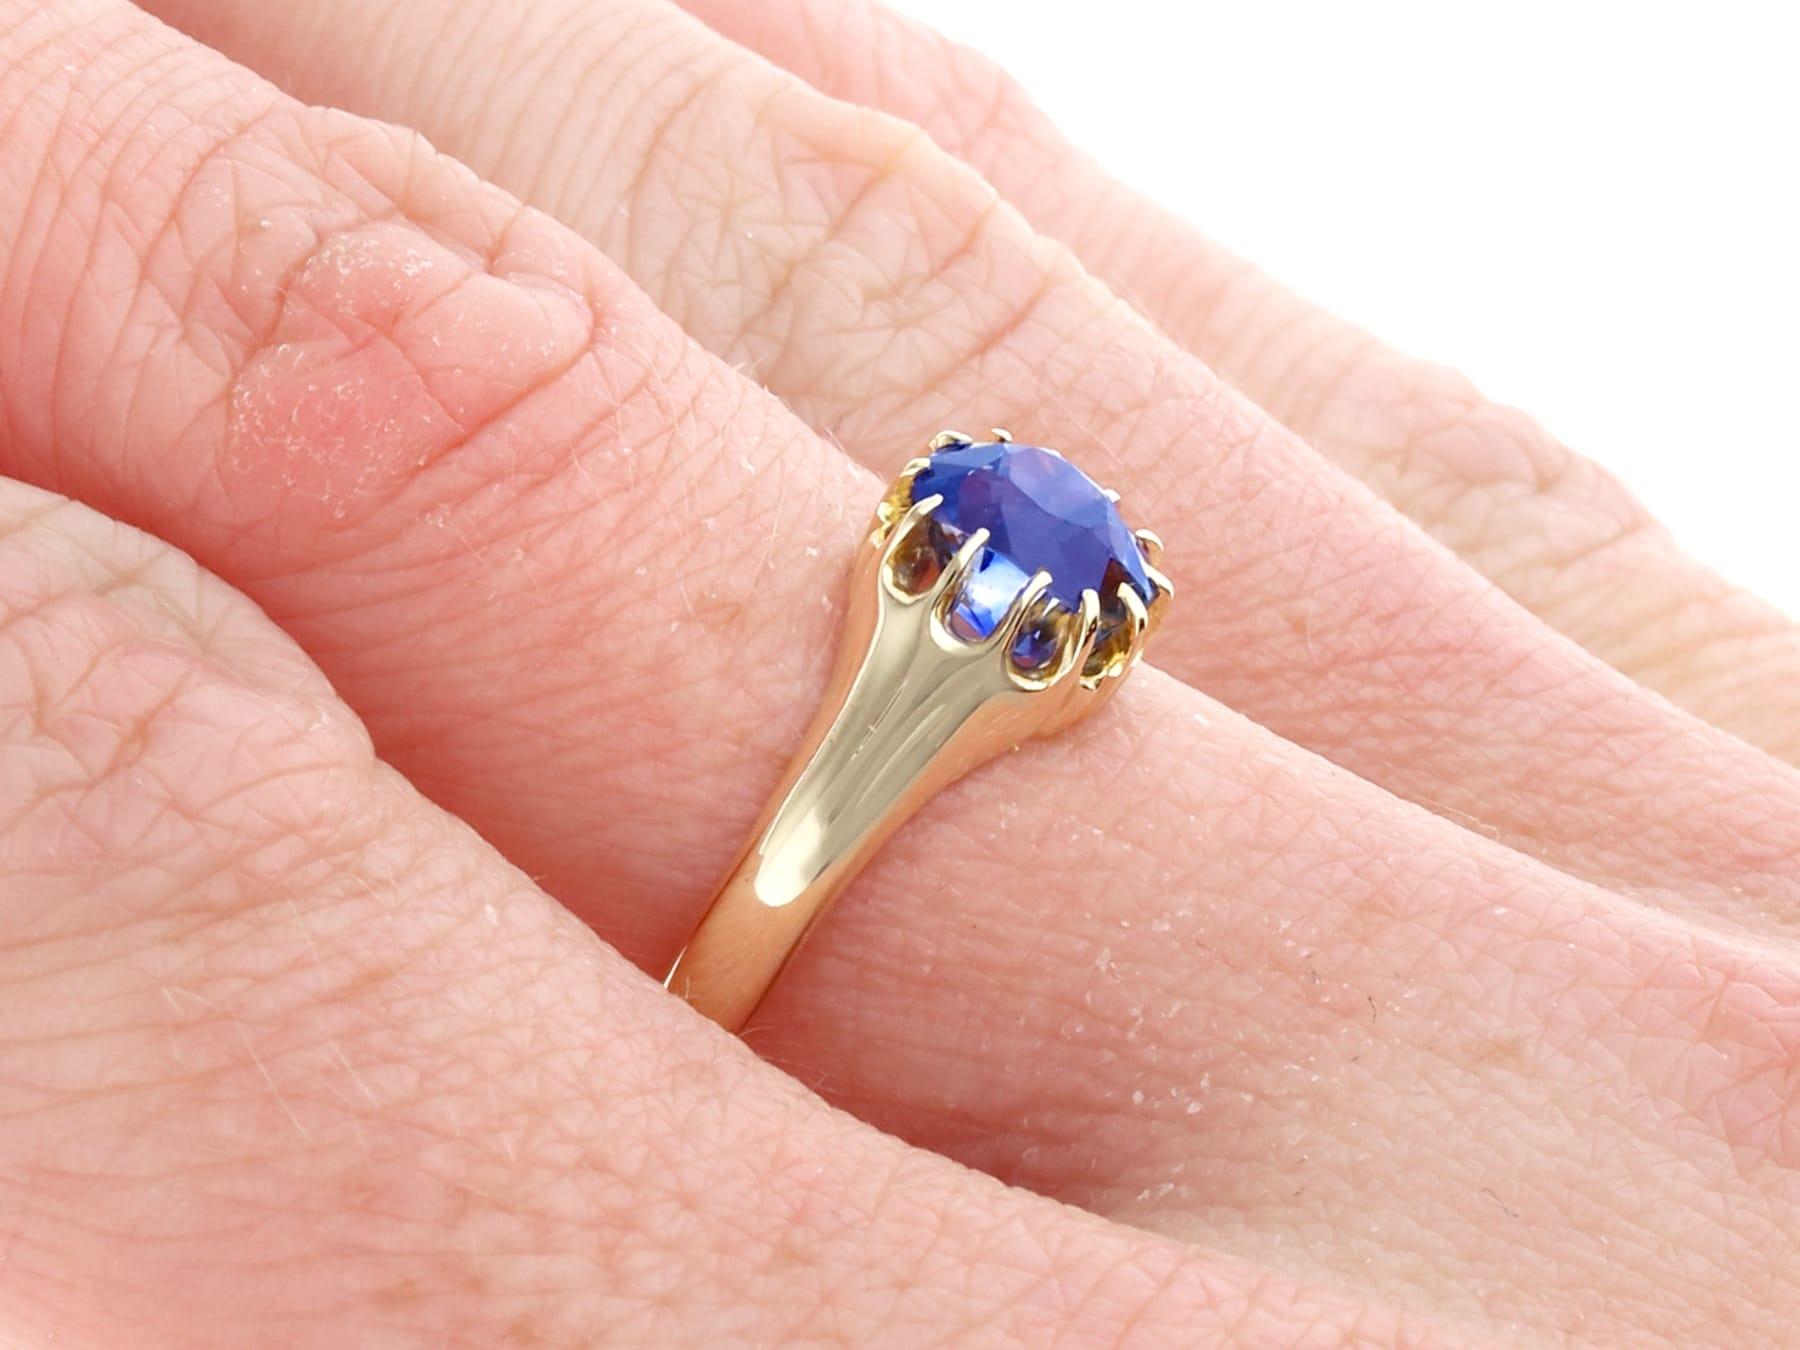 Antique 1.42 Carat Basaltic Sapphire and 14k Yellow Gold Ring, circa 1910 For Sale 3